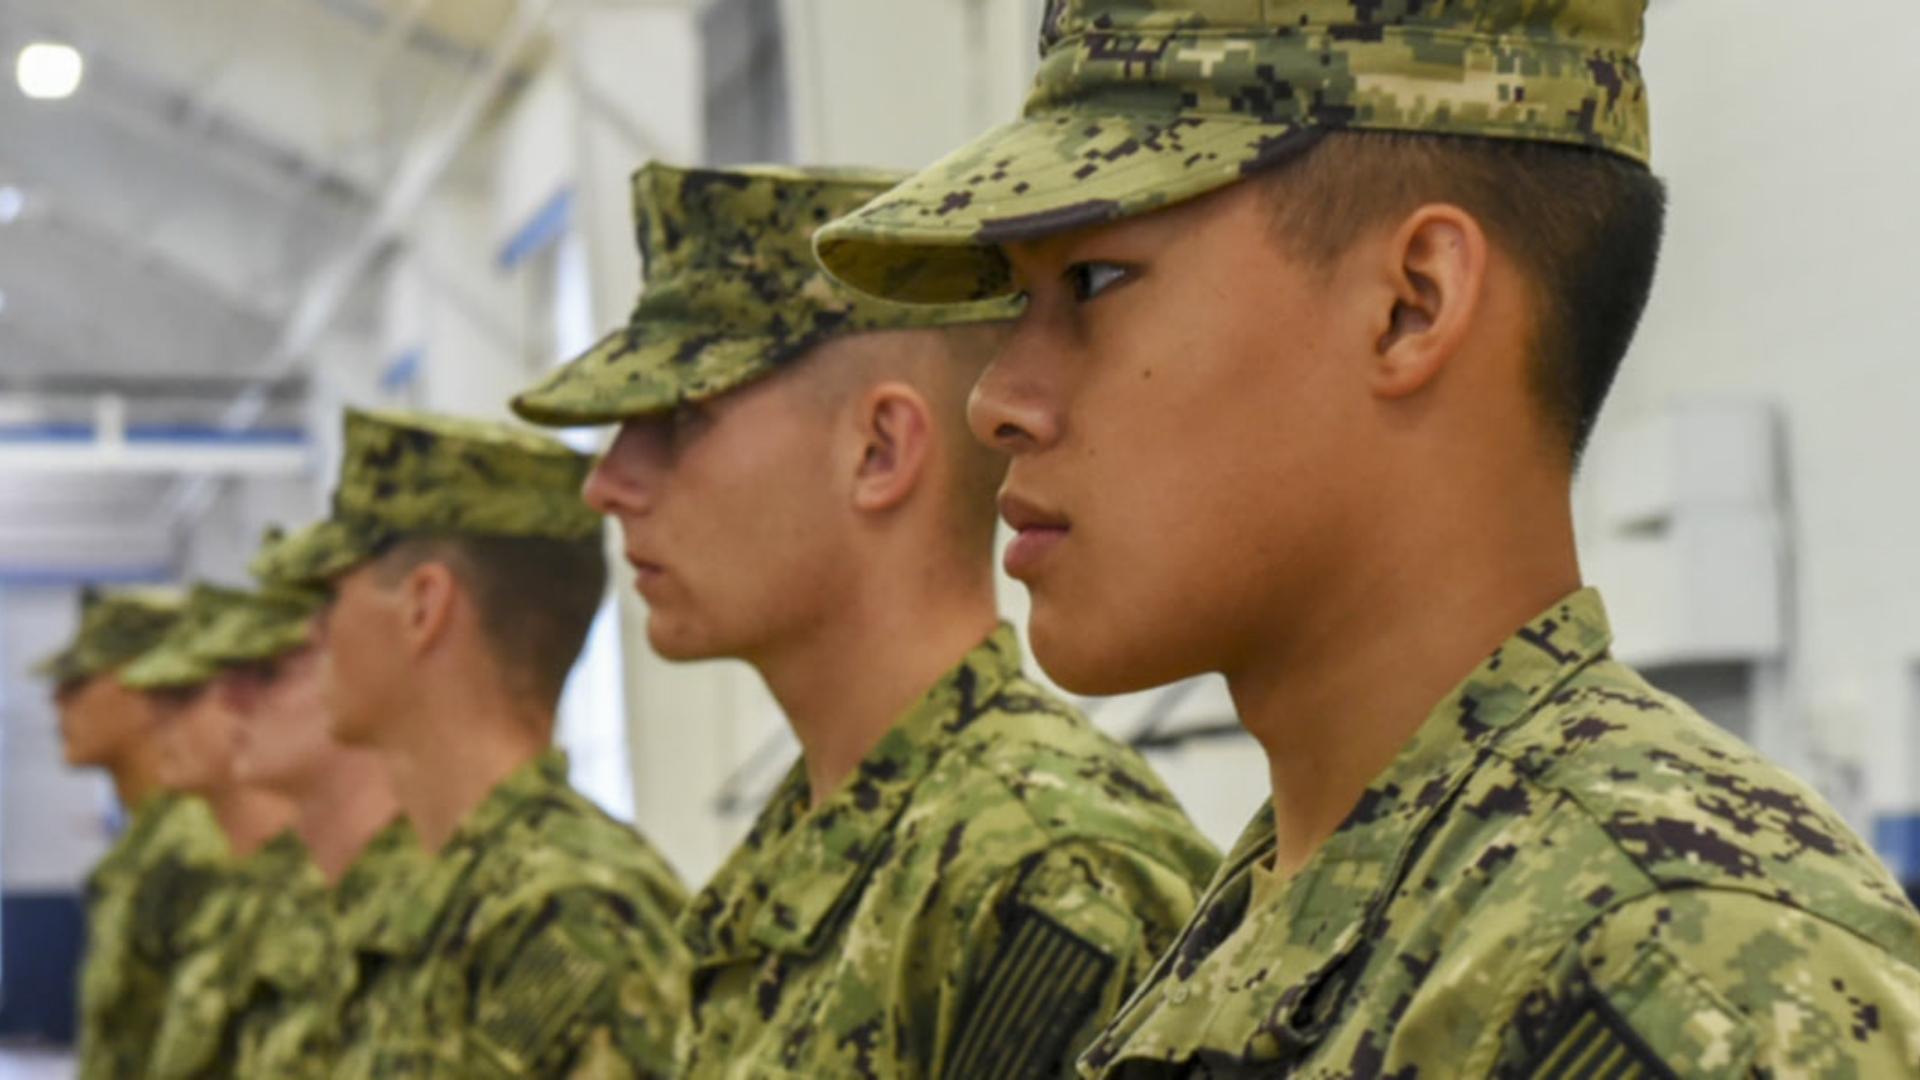 New Student Indoctrination midshipman candidates stand at attention inside Atlantic Fleet Drill Hall at Recruit Training Command (RTC) as part of NSI